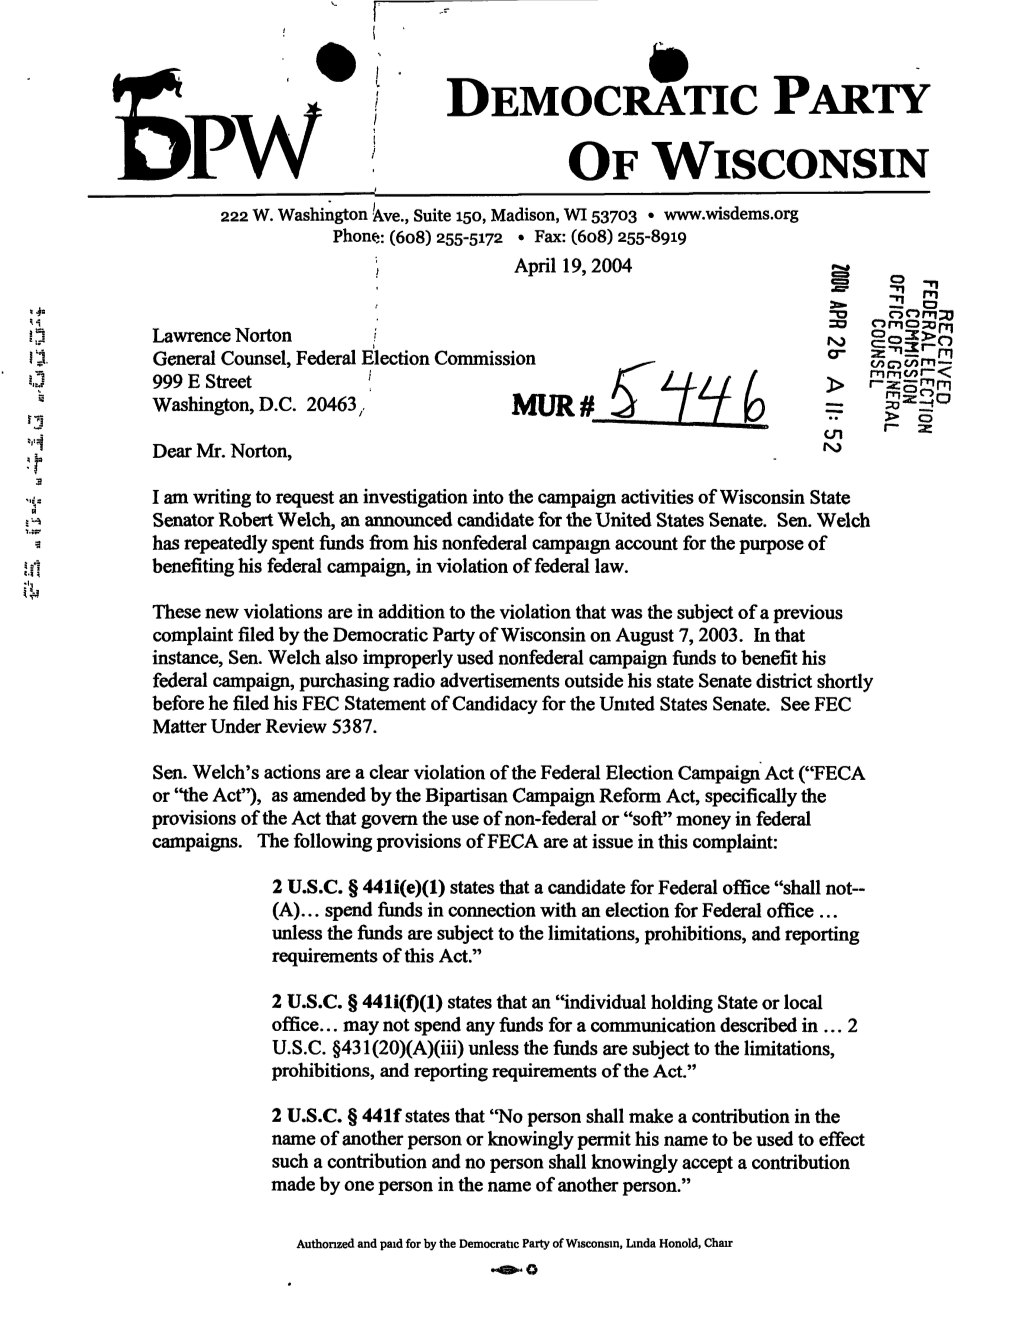 Democratic Party of Wisconsin on August 7,2003